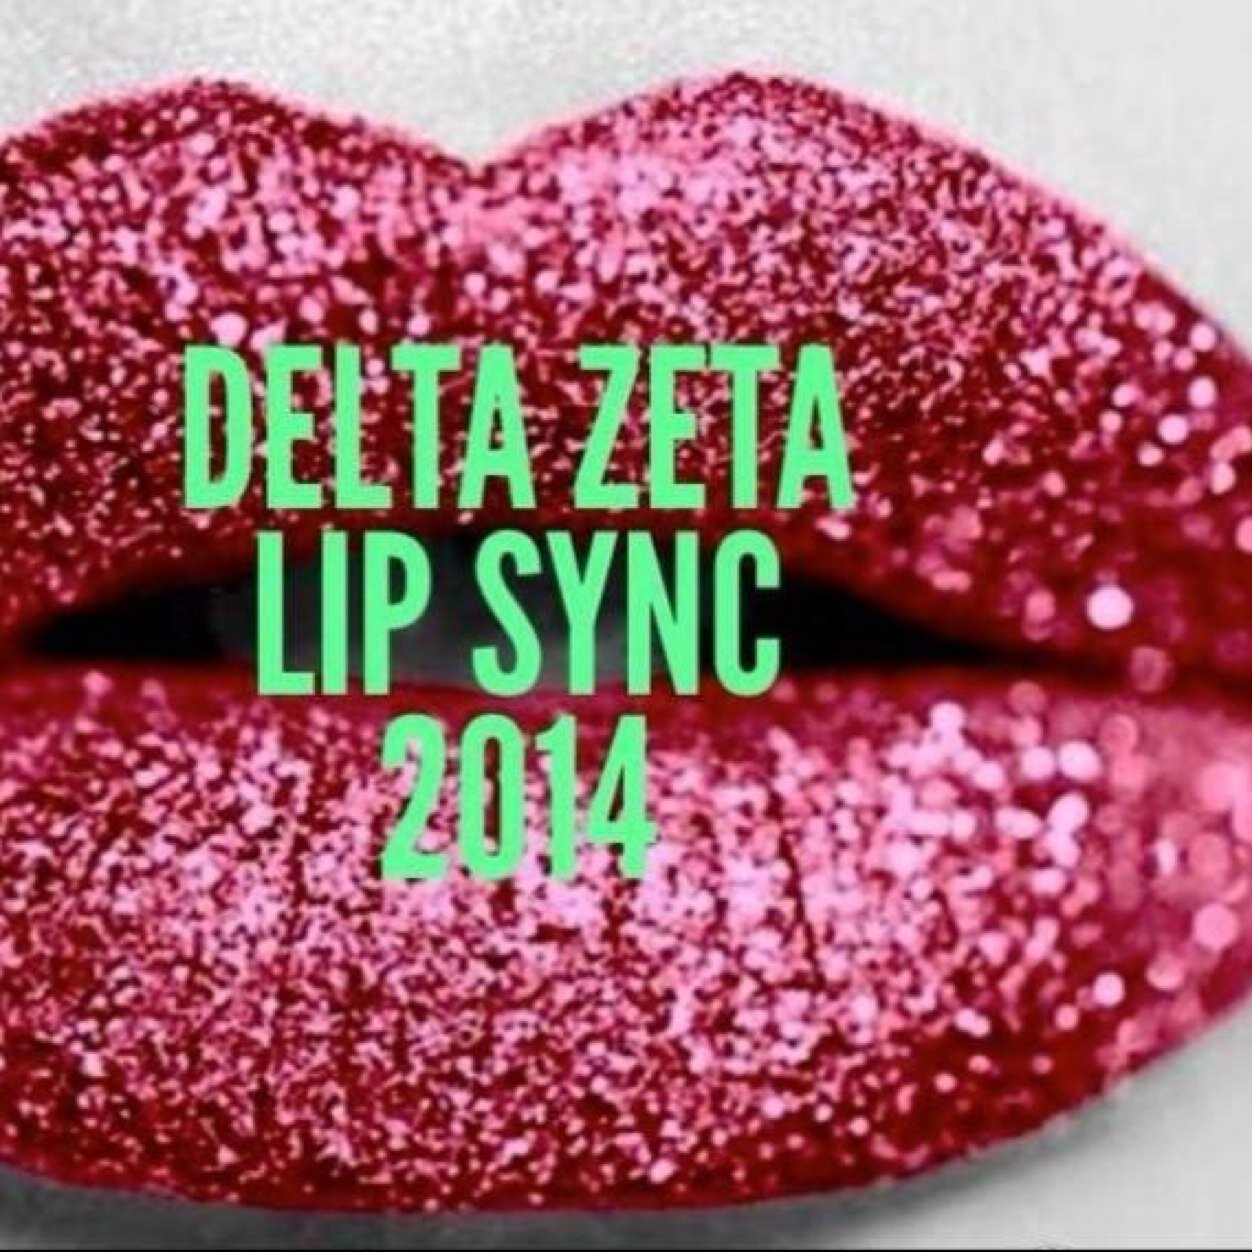 KSU's Delta Zeta annual philanthropic event, Lip Sync, will be held on March 1, 2014. Proceeds benefit the hearing and speech impaired. Follow us for more info!